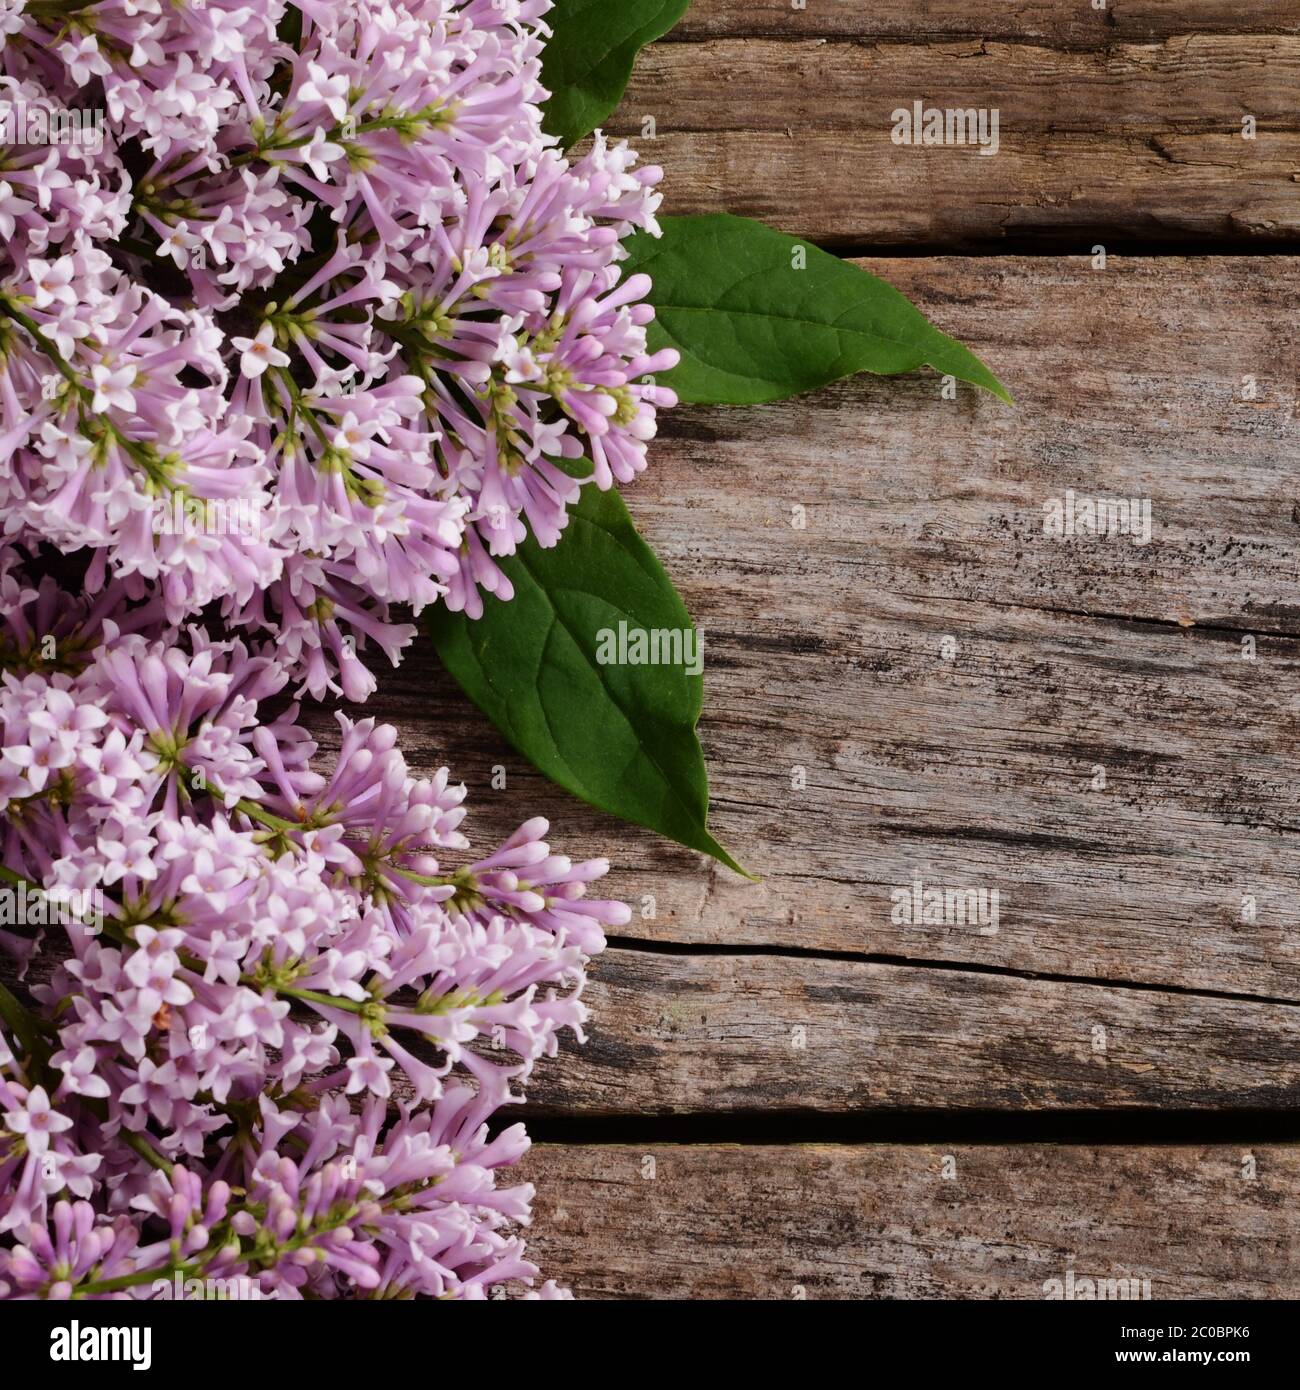 The flower lilac a wooden background Stock Photo